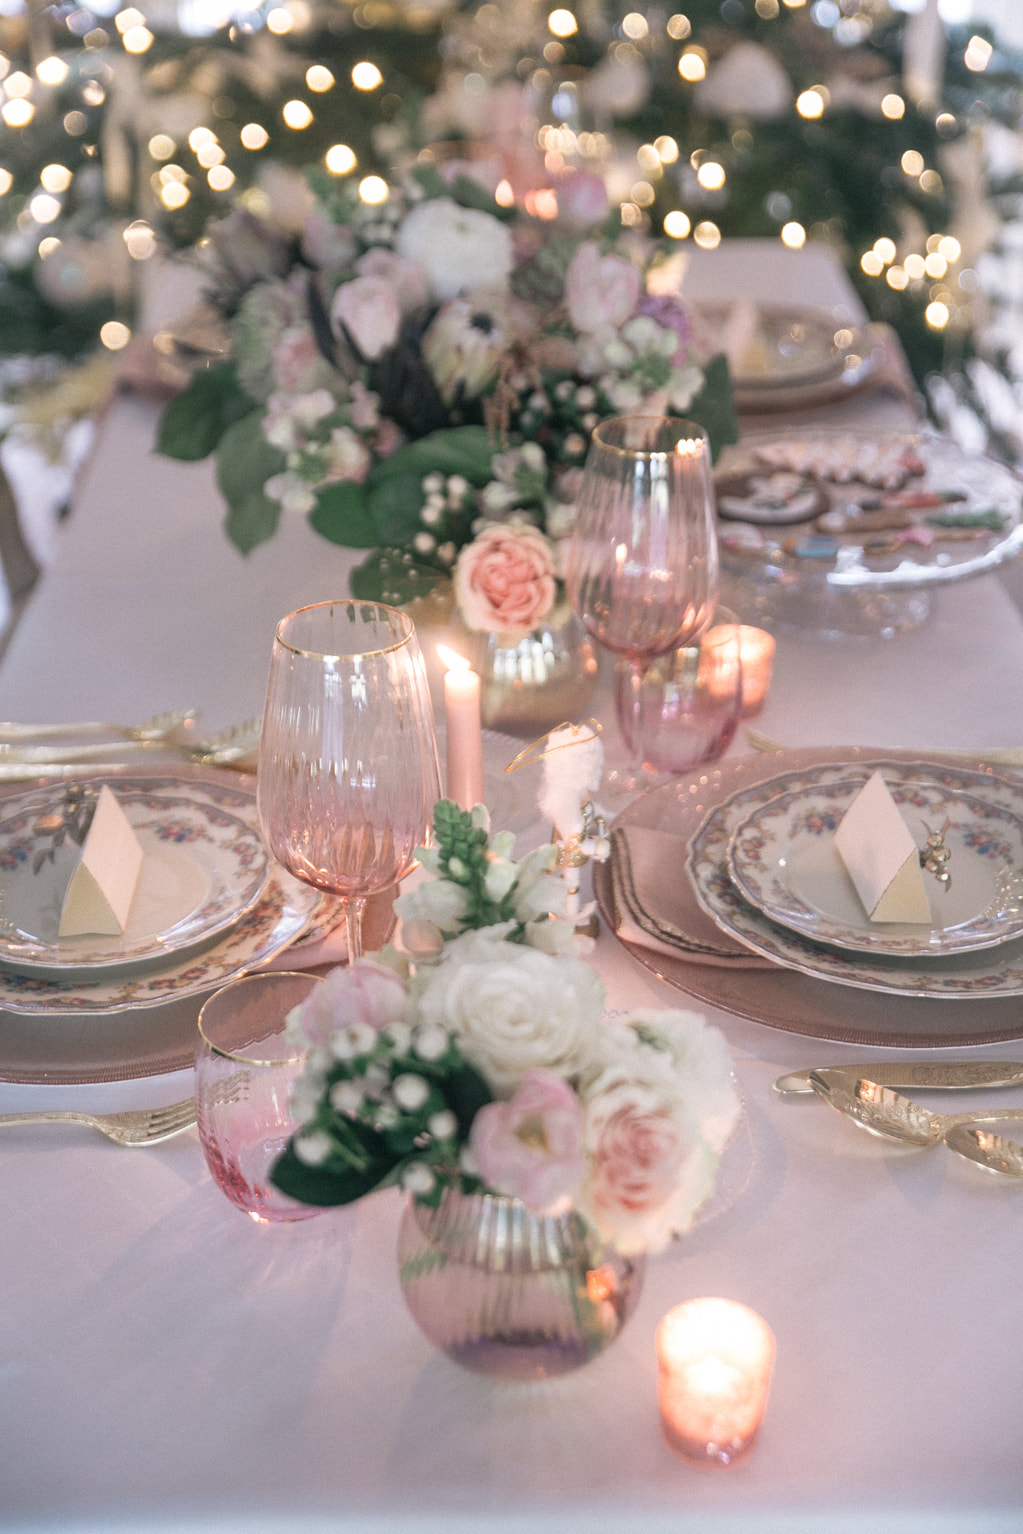 25 Winter Wedding Tips You Need to Know by The Belle Blog